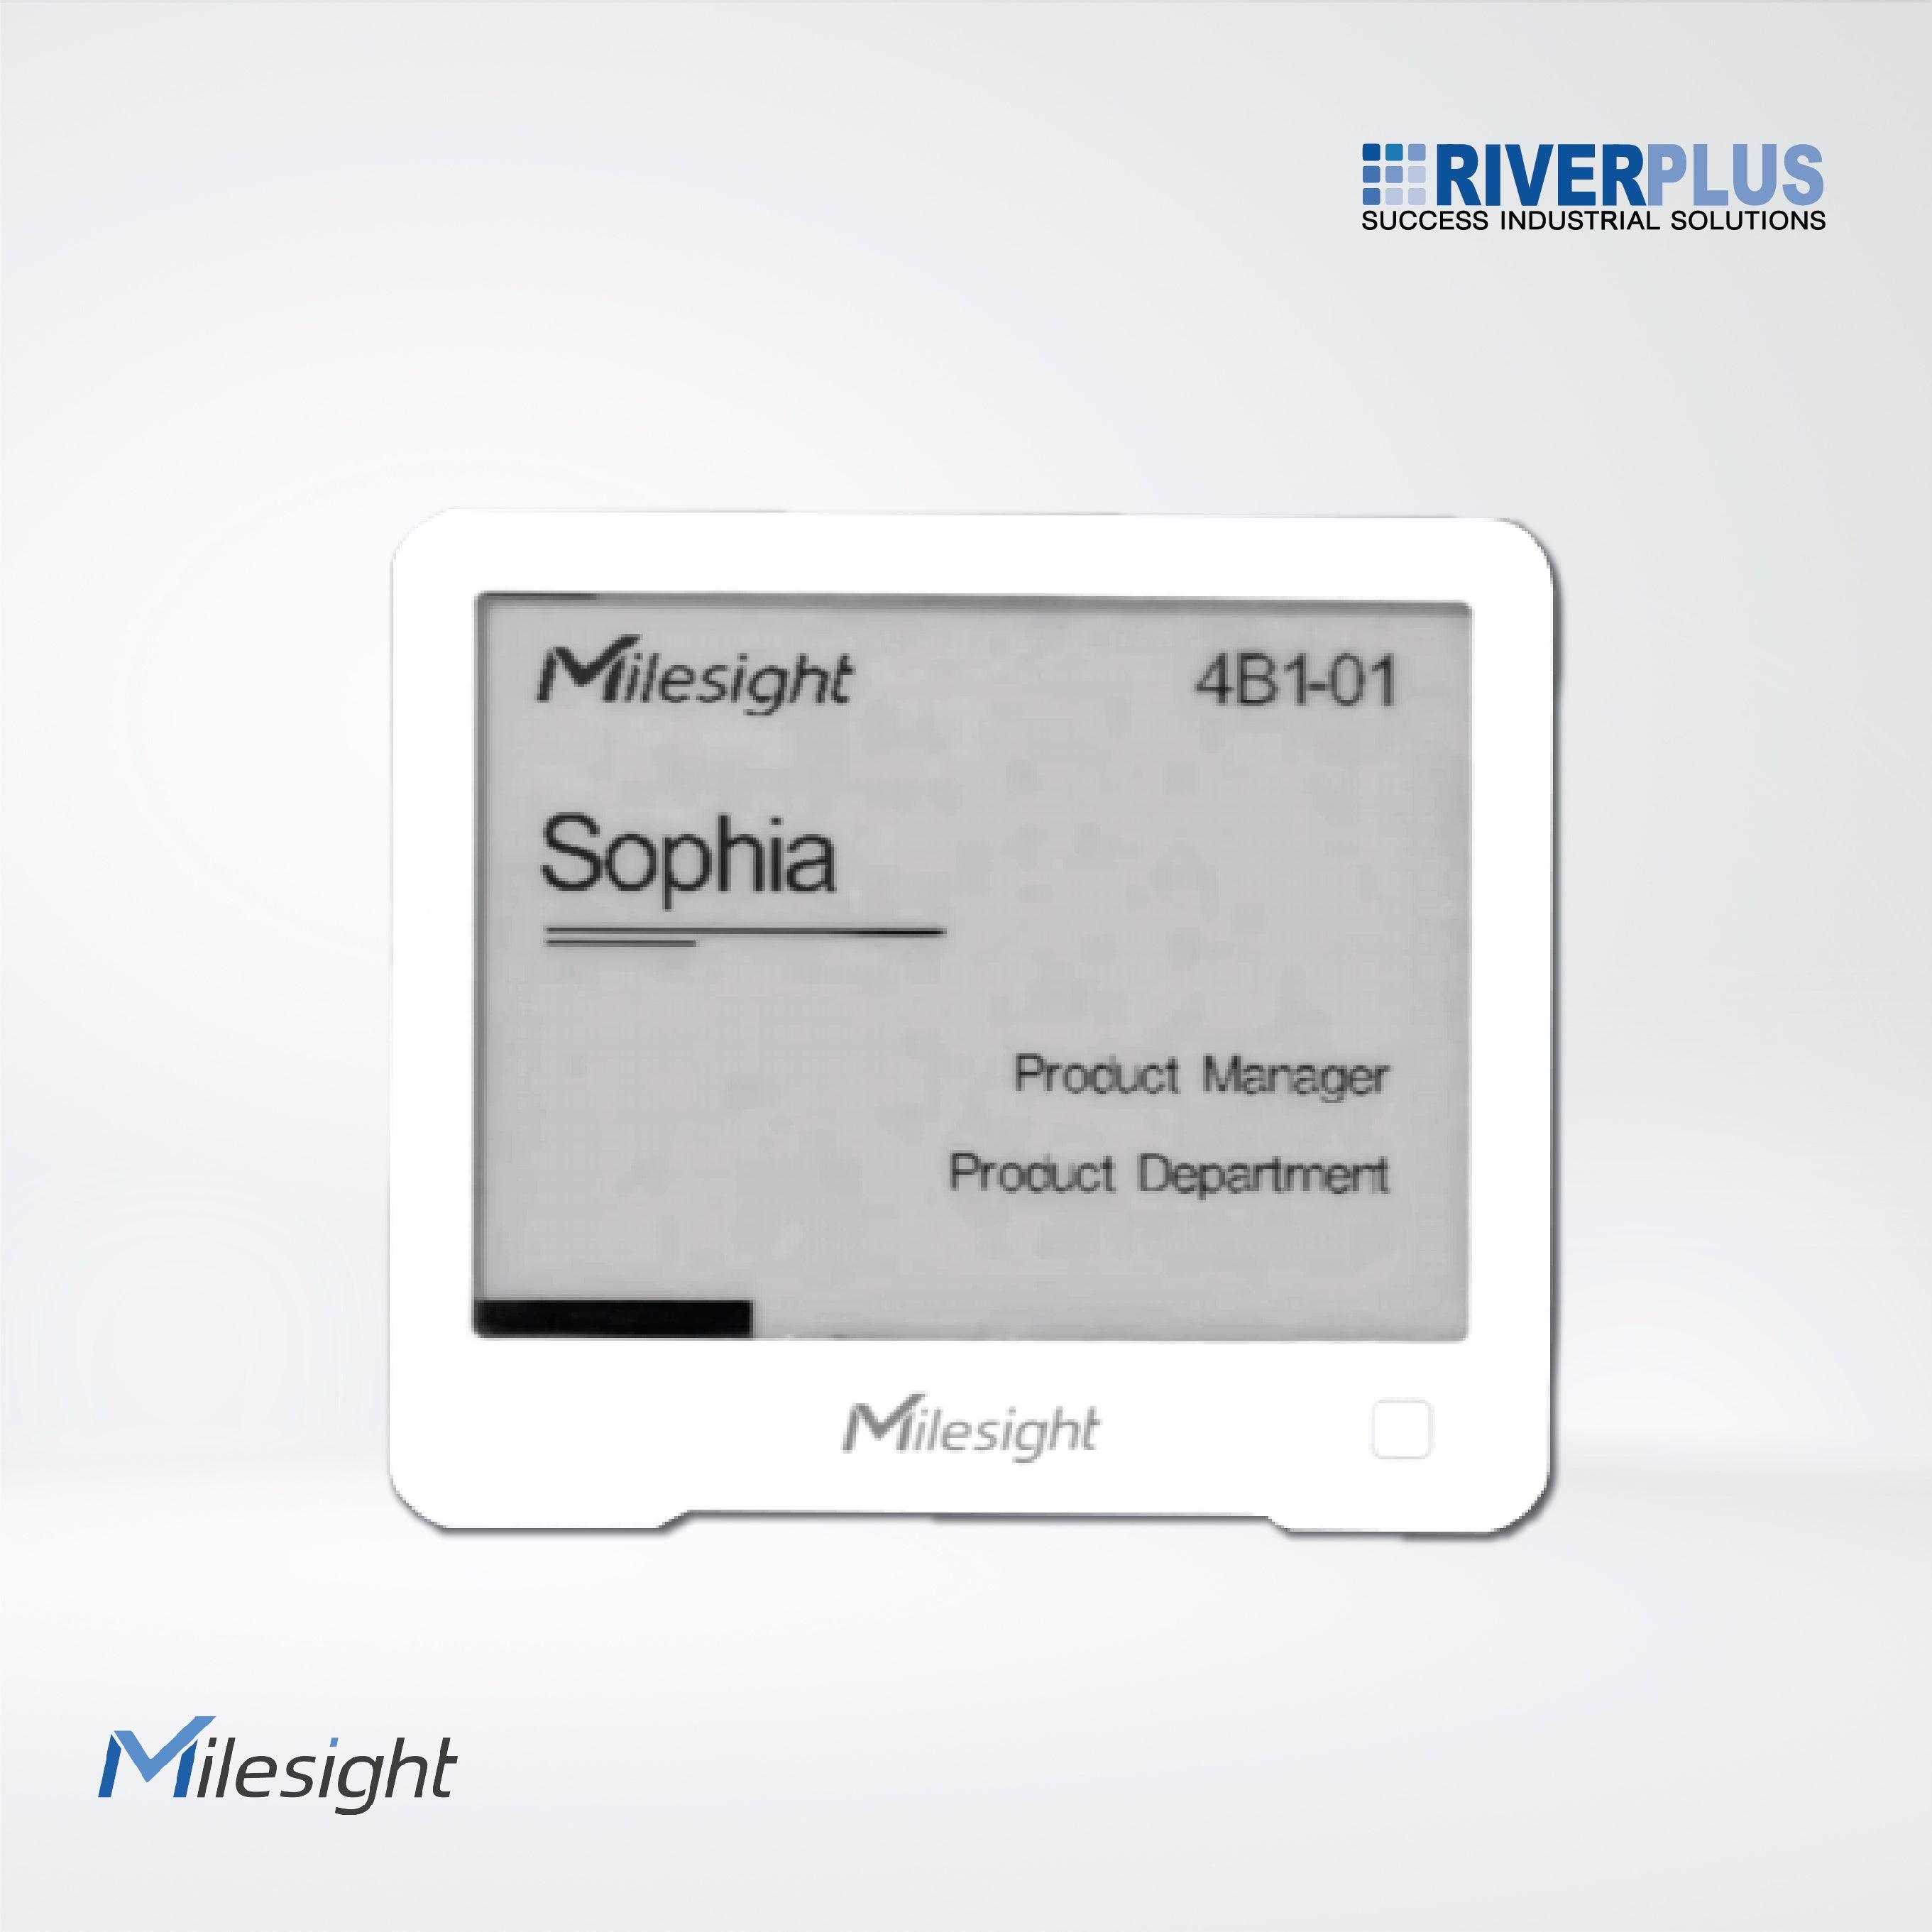 DS3604 IoT E-ink Display - Riverplus